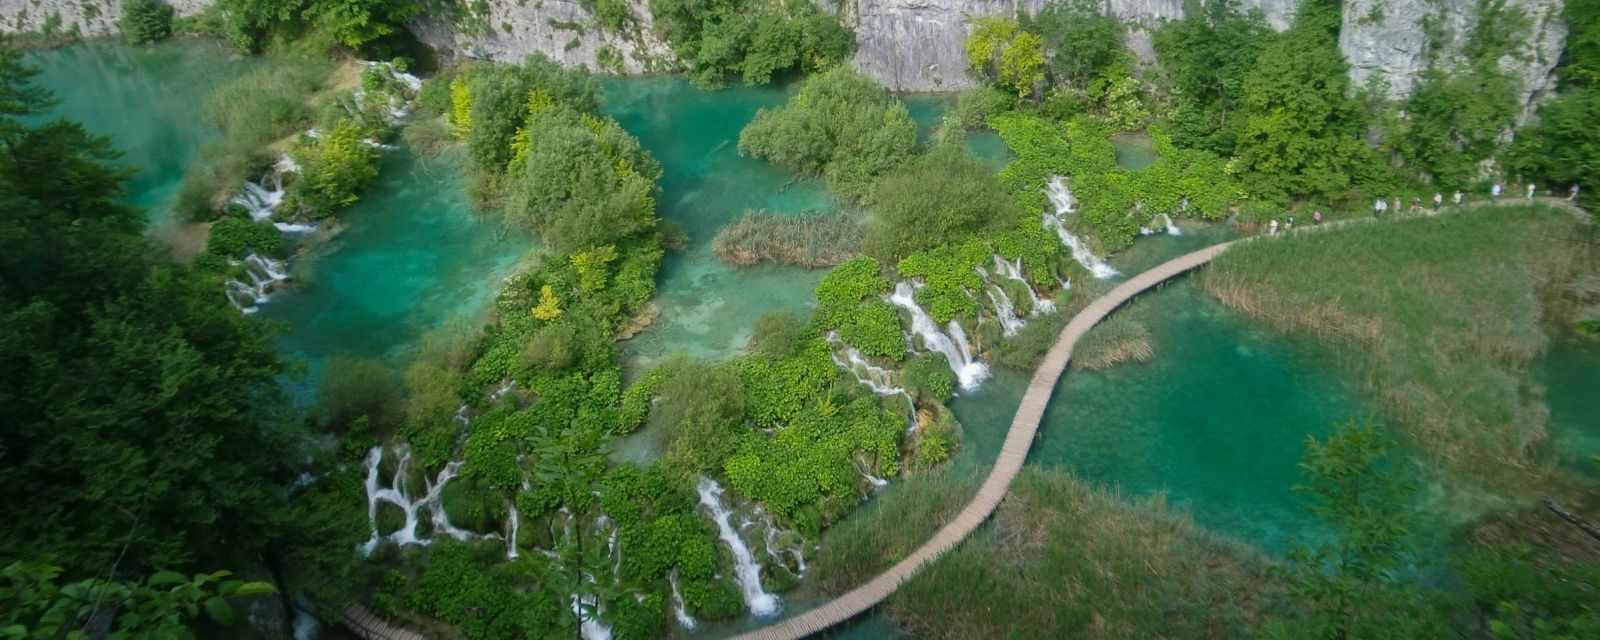 Plitvice Lakes in Croatia - Hiking Guide for Entrance 1 and 2